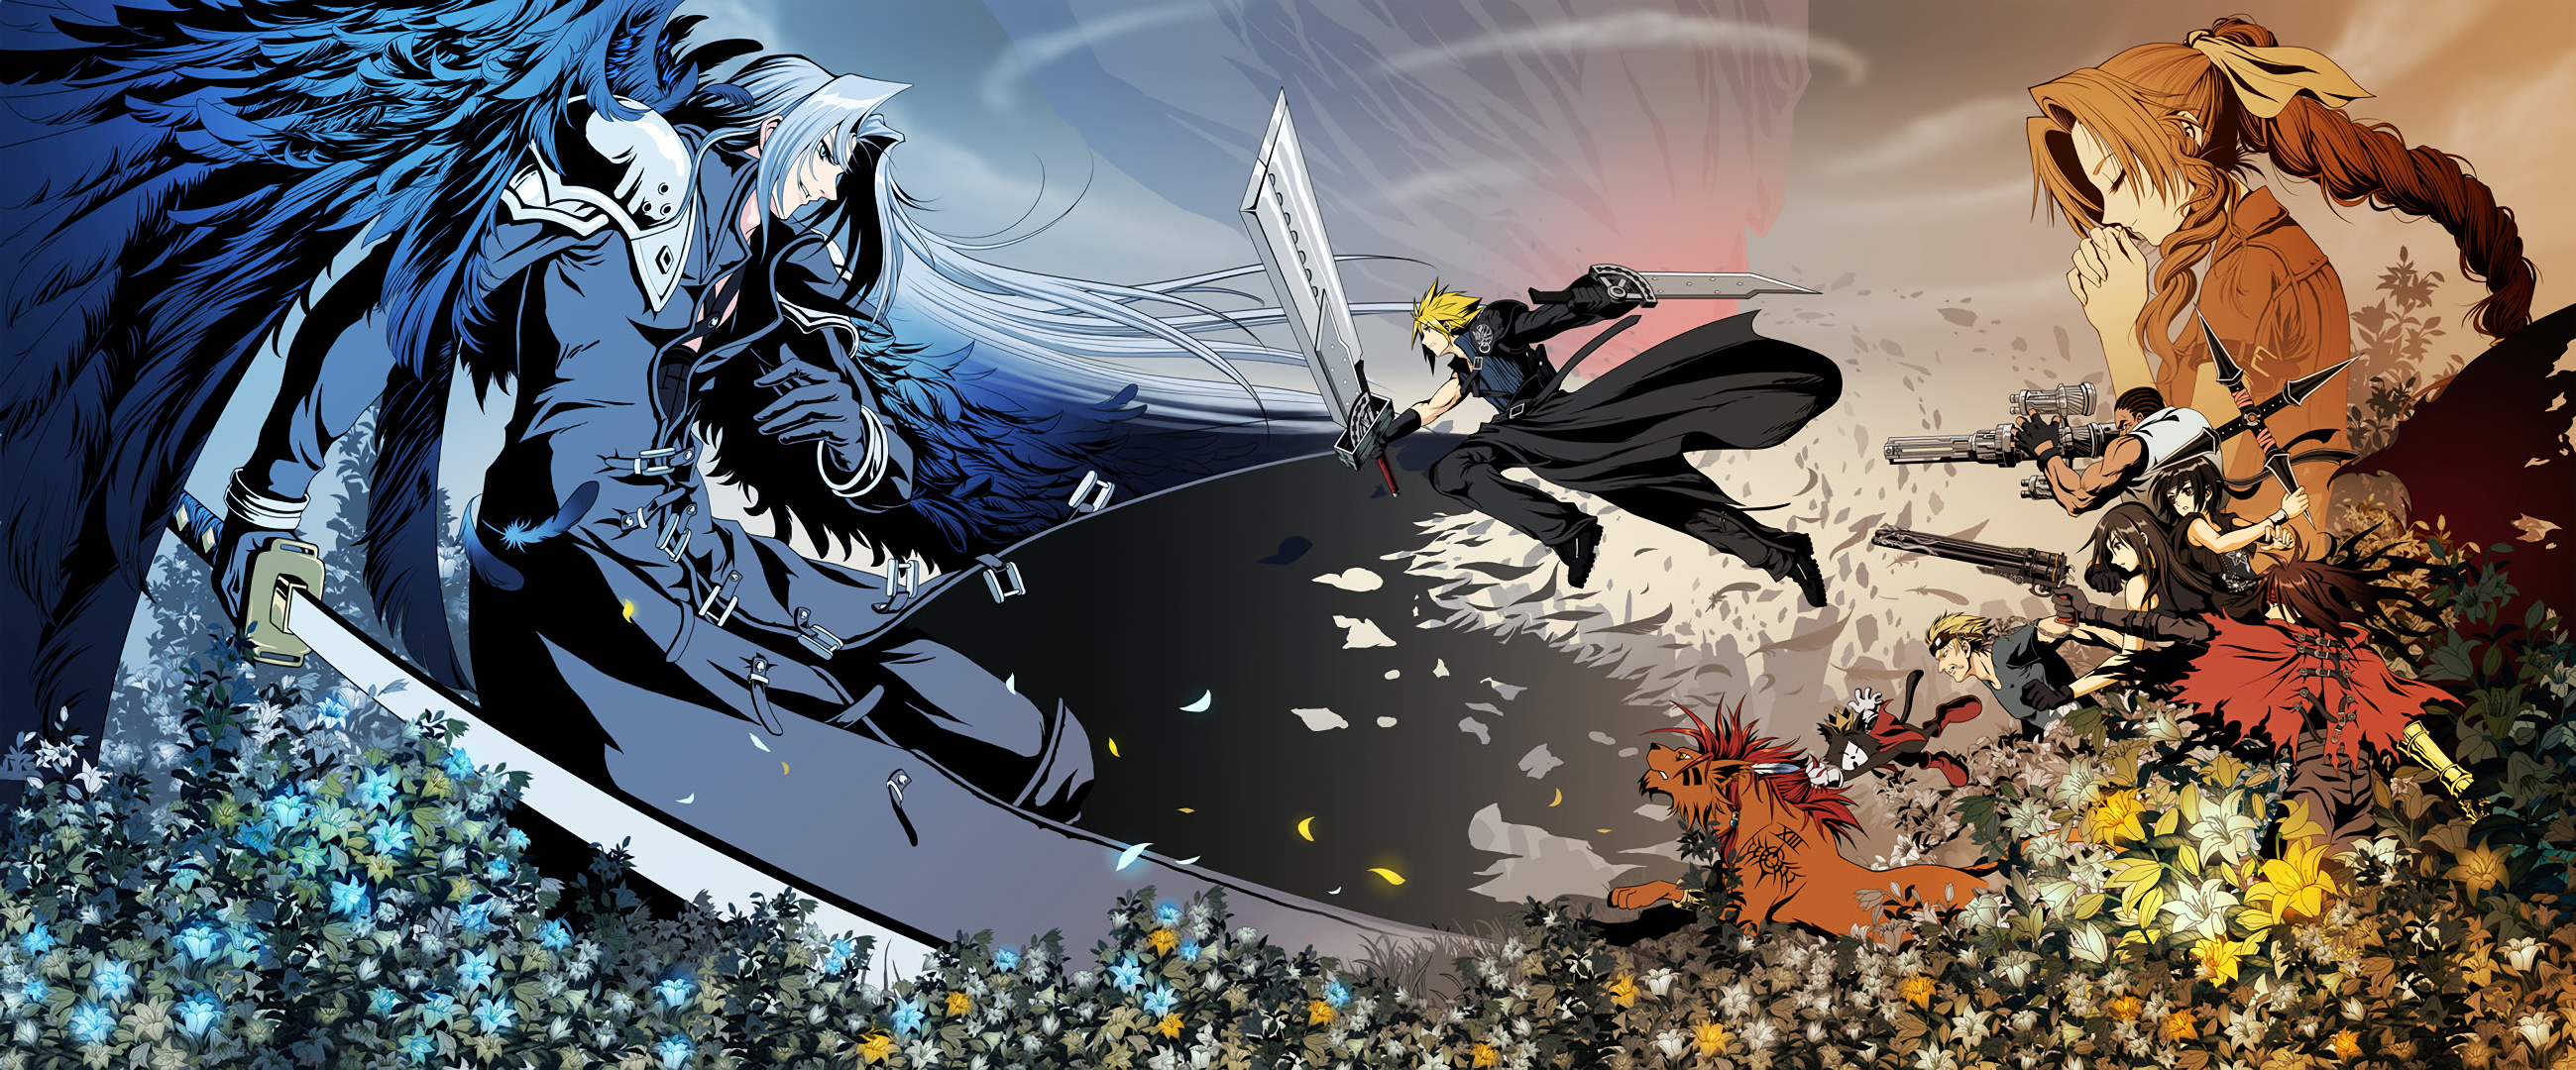 Final Fantasy VII characters engage in an epic battle: The Crazy Angel Vs The Revenger & friends.